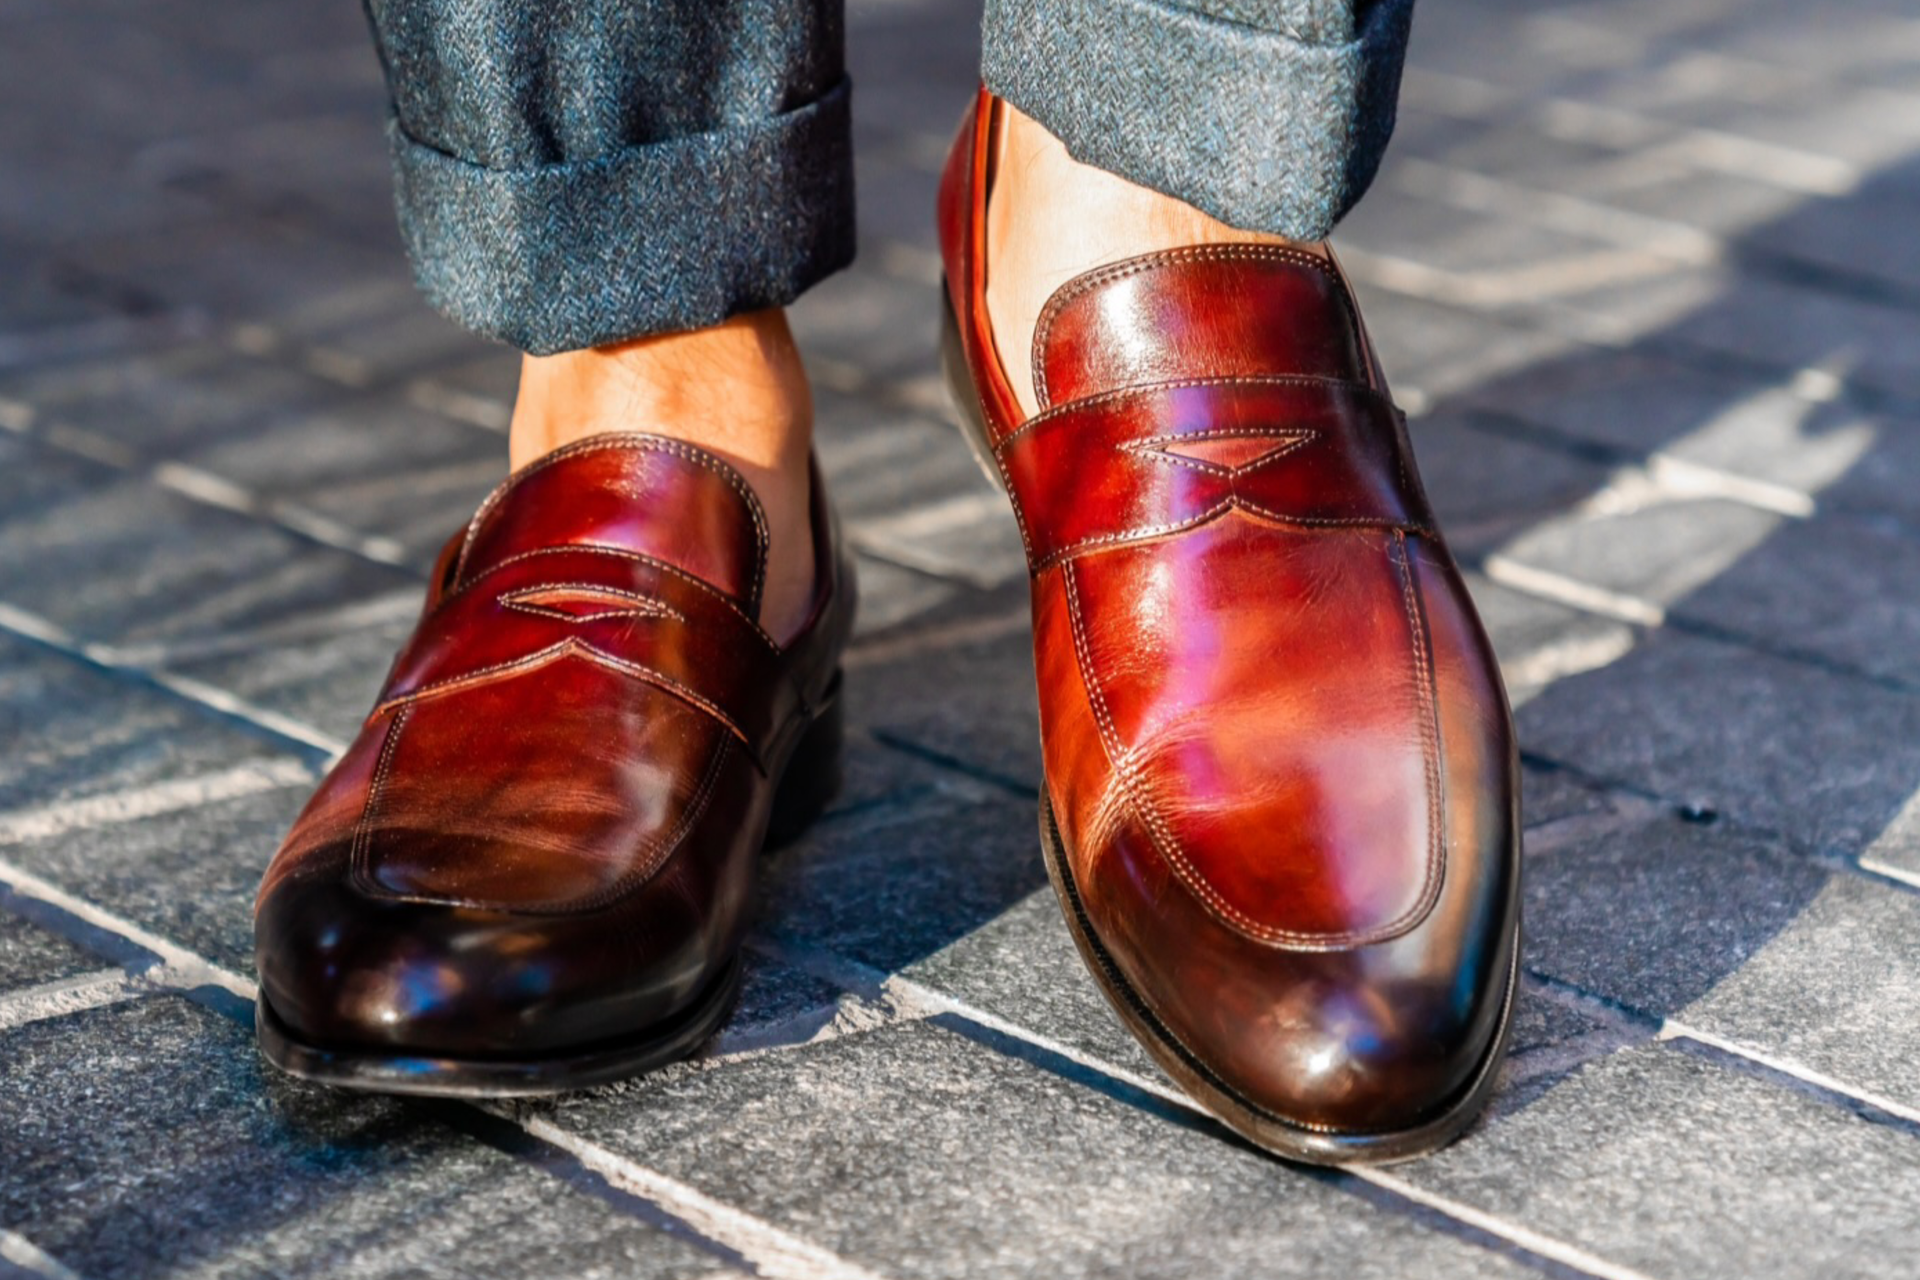 DONUM LUXURY SHOES - Dandy In The Bronx